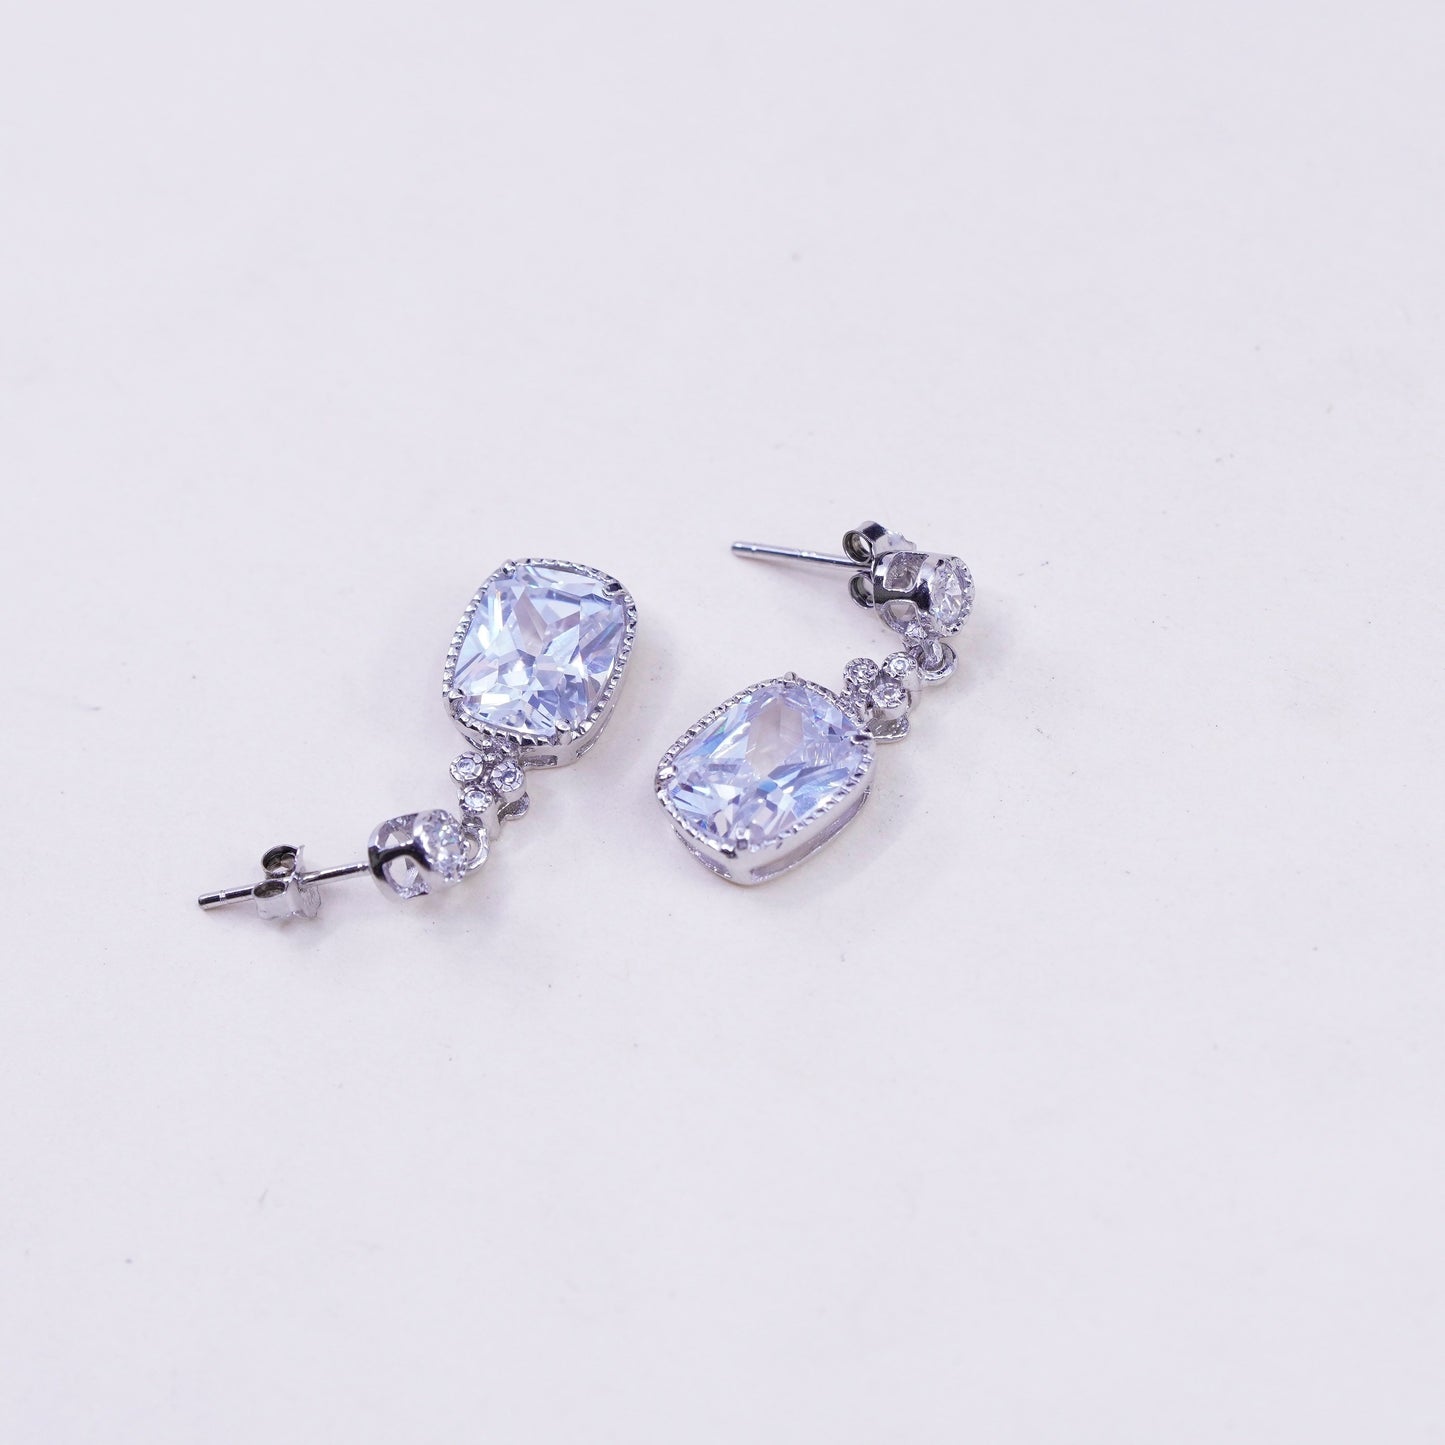 Vintage sterling 925 silver handmade earrings with rectangular CZ